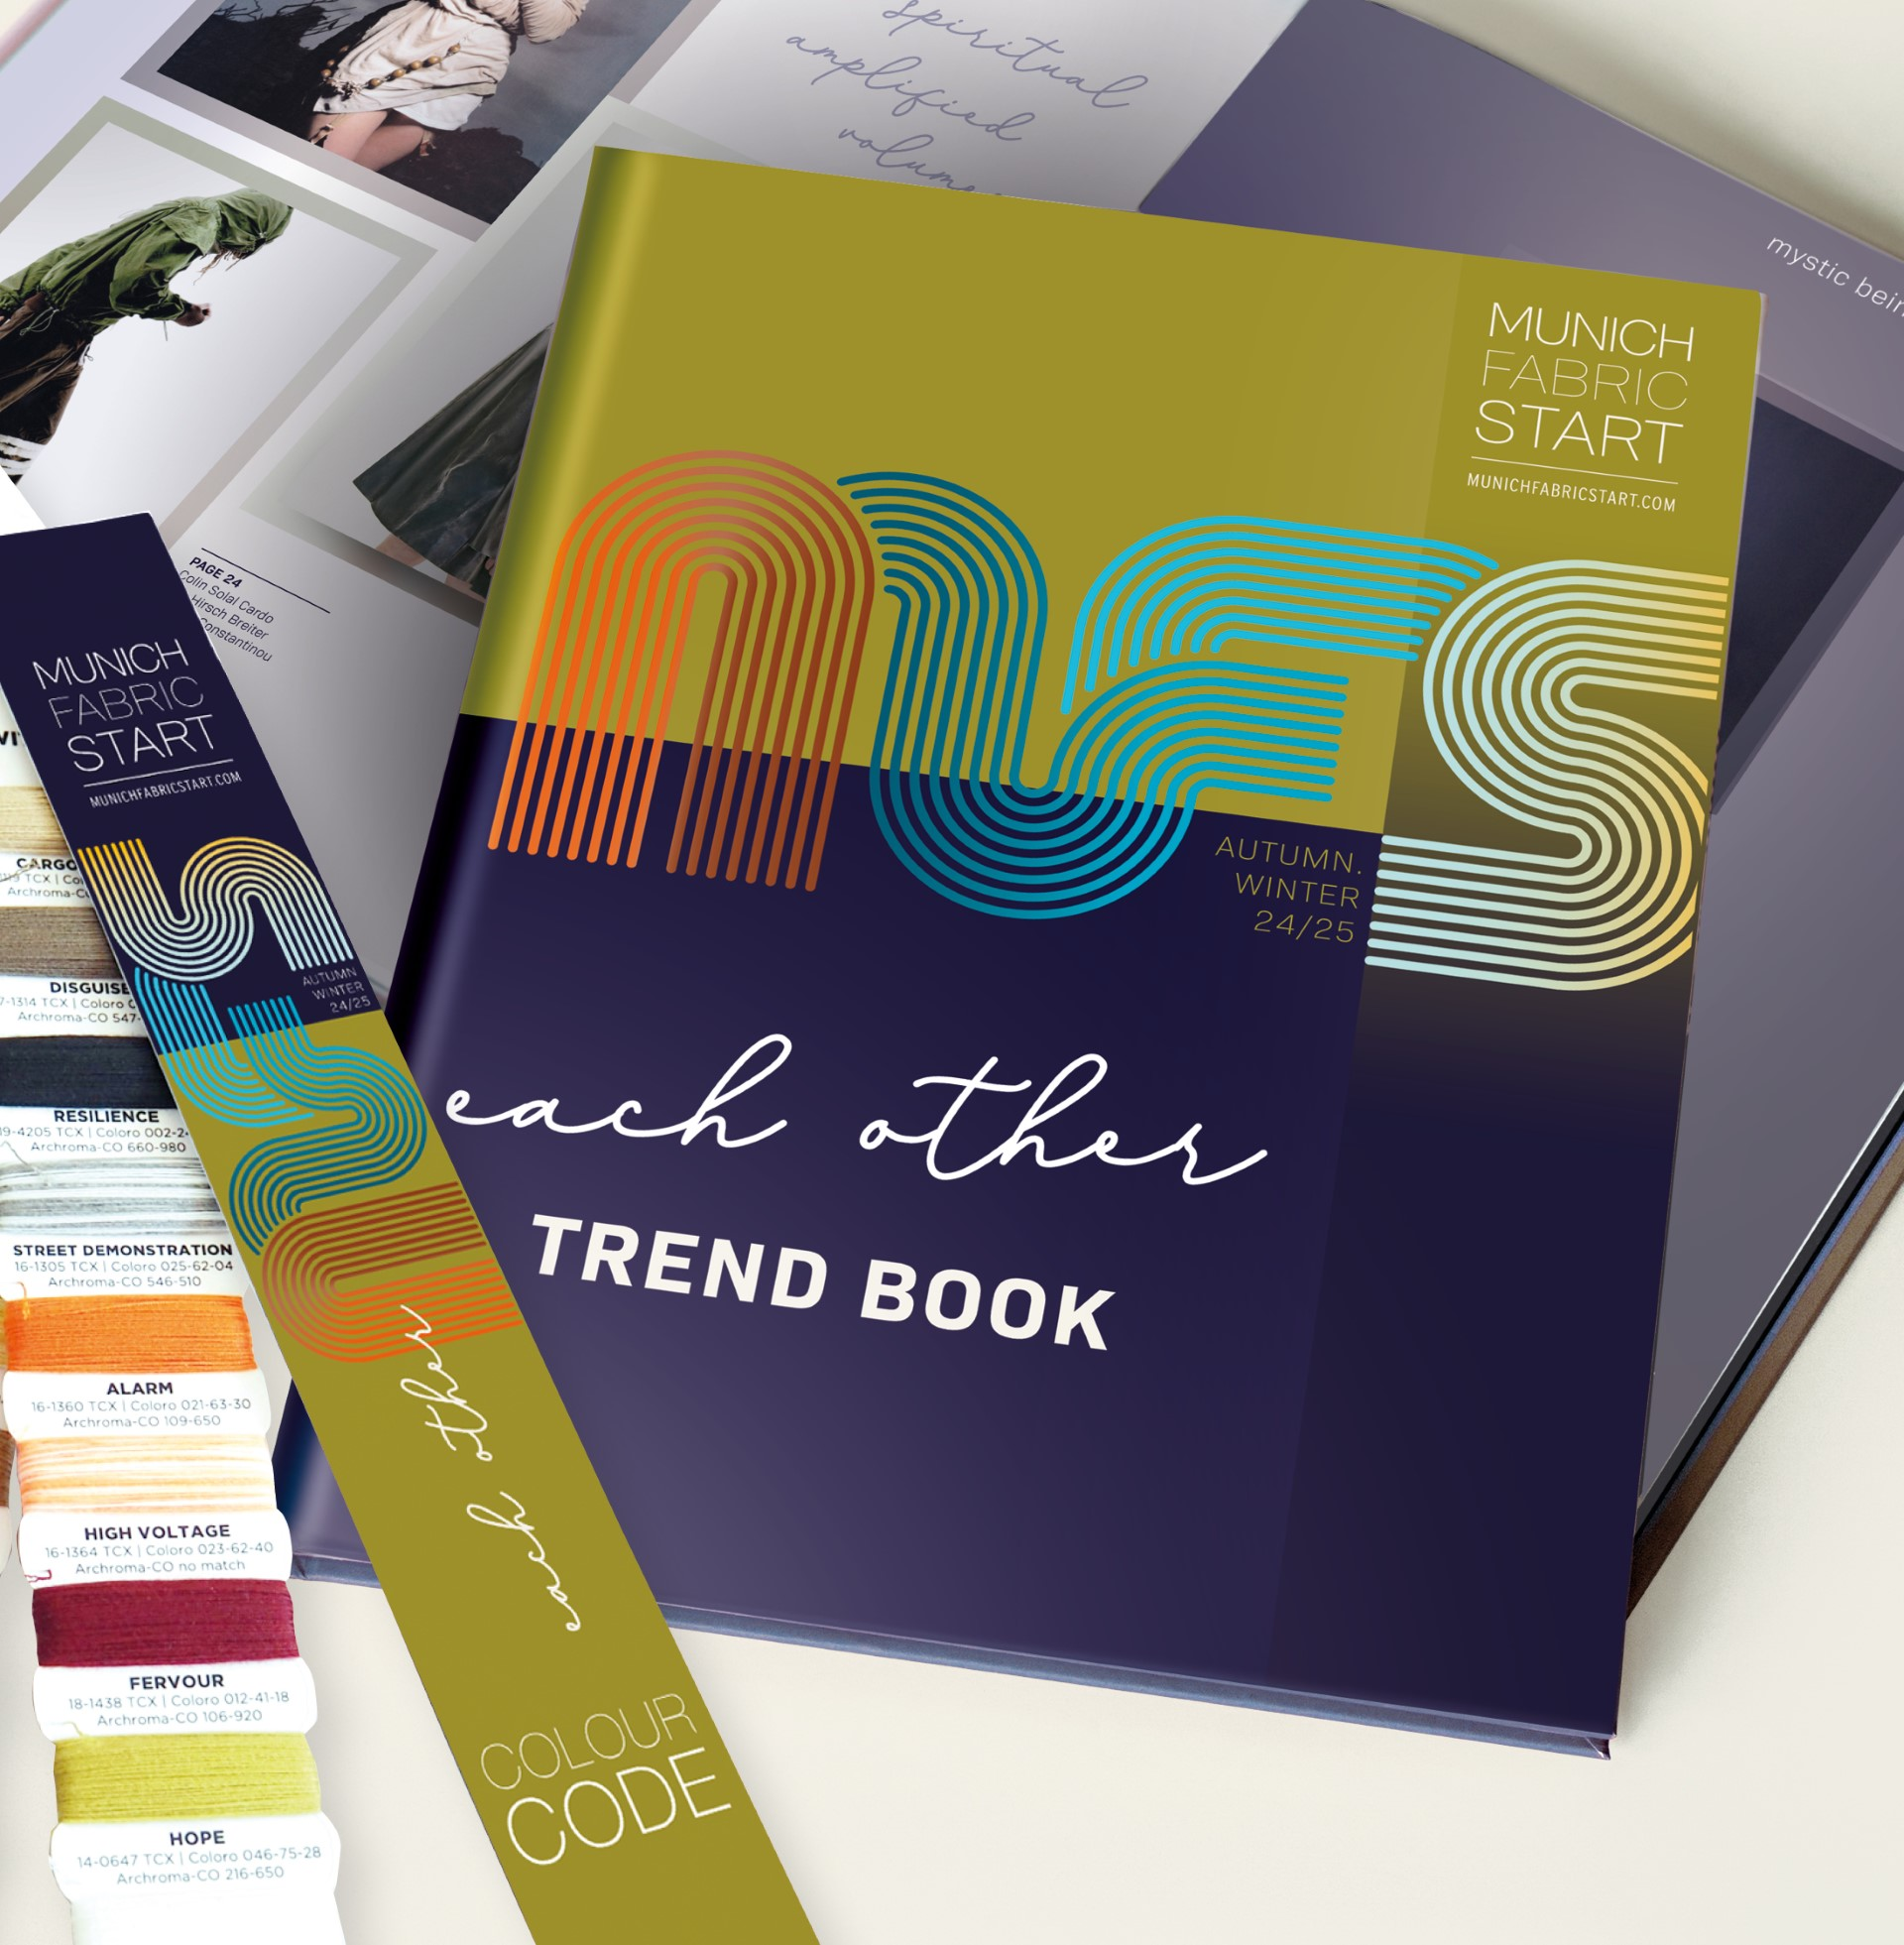 NOW AVAILABLE: AUTUMN.WINTER 24/25 TREND BOOK & COLOUR CODE